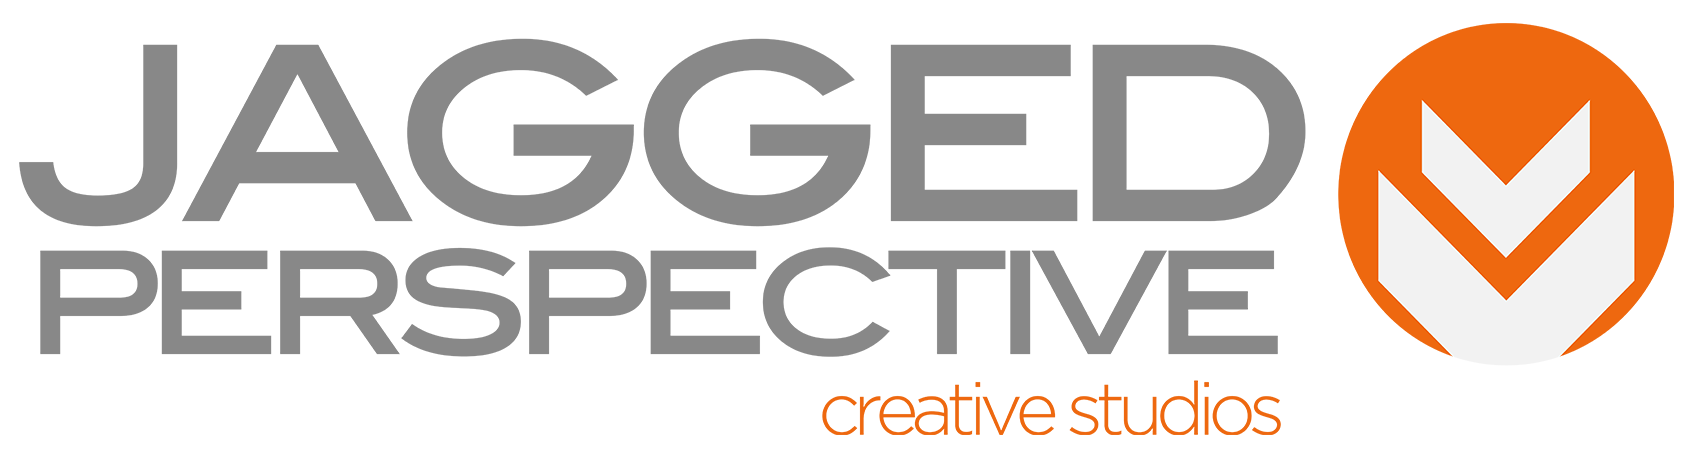 Jagged Perspective LOGO